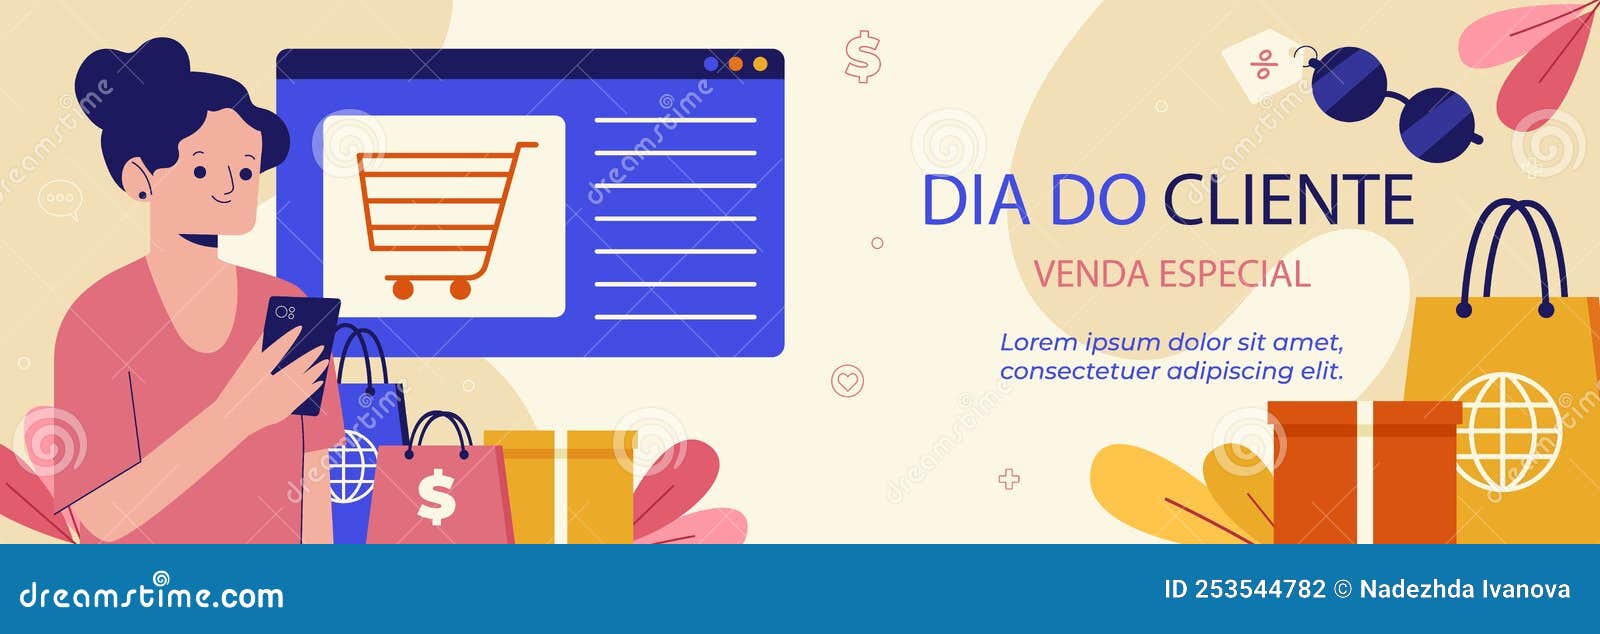 flat horizontal sale banner template for dia do cliente  .